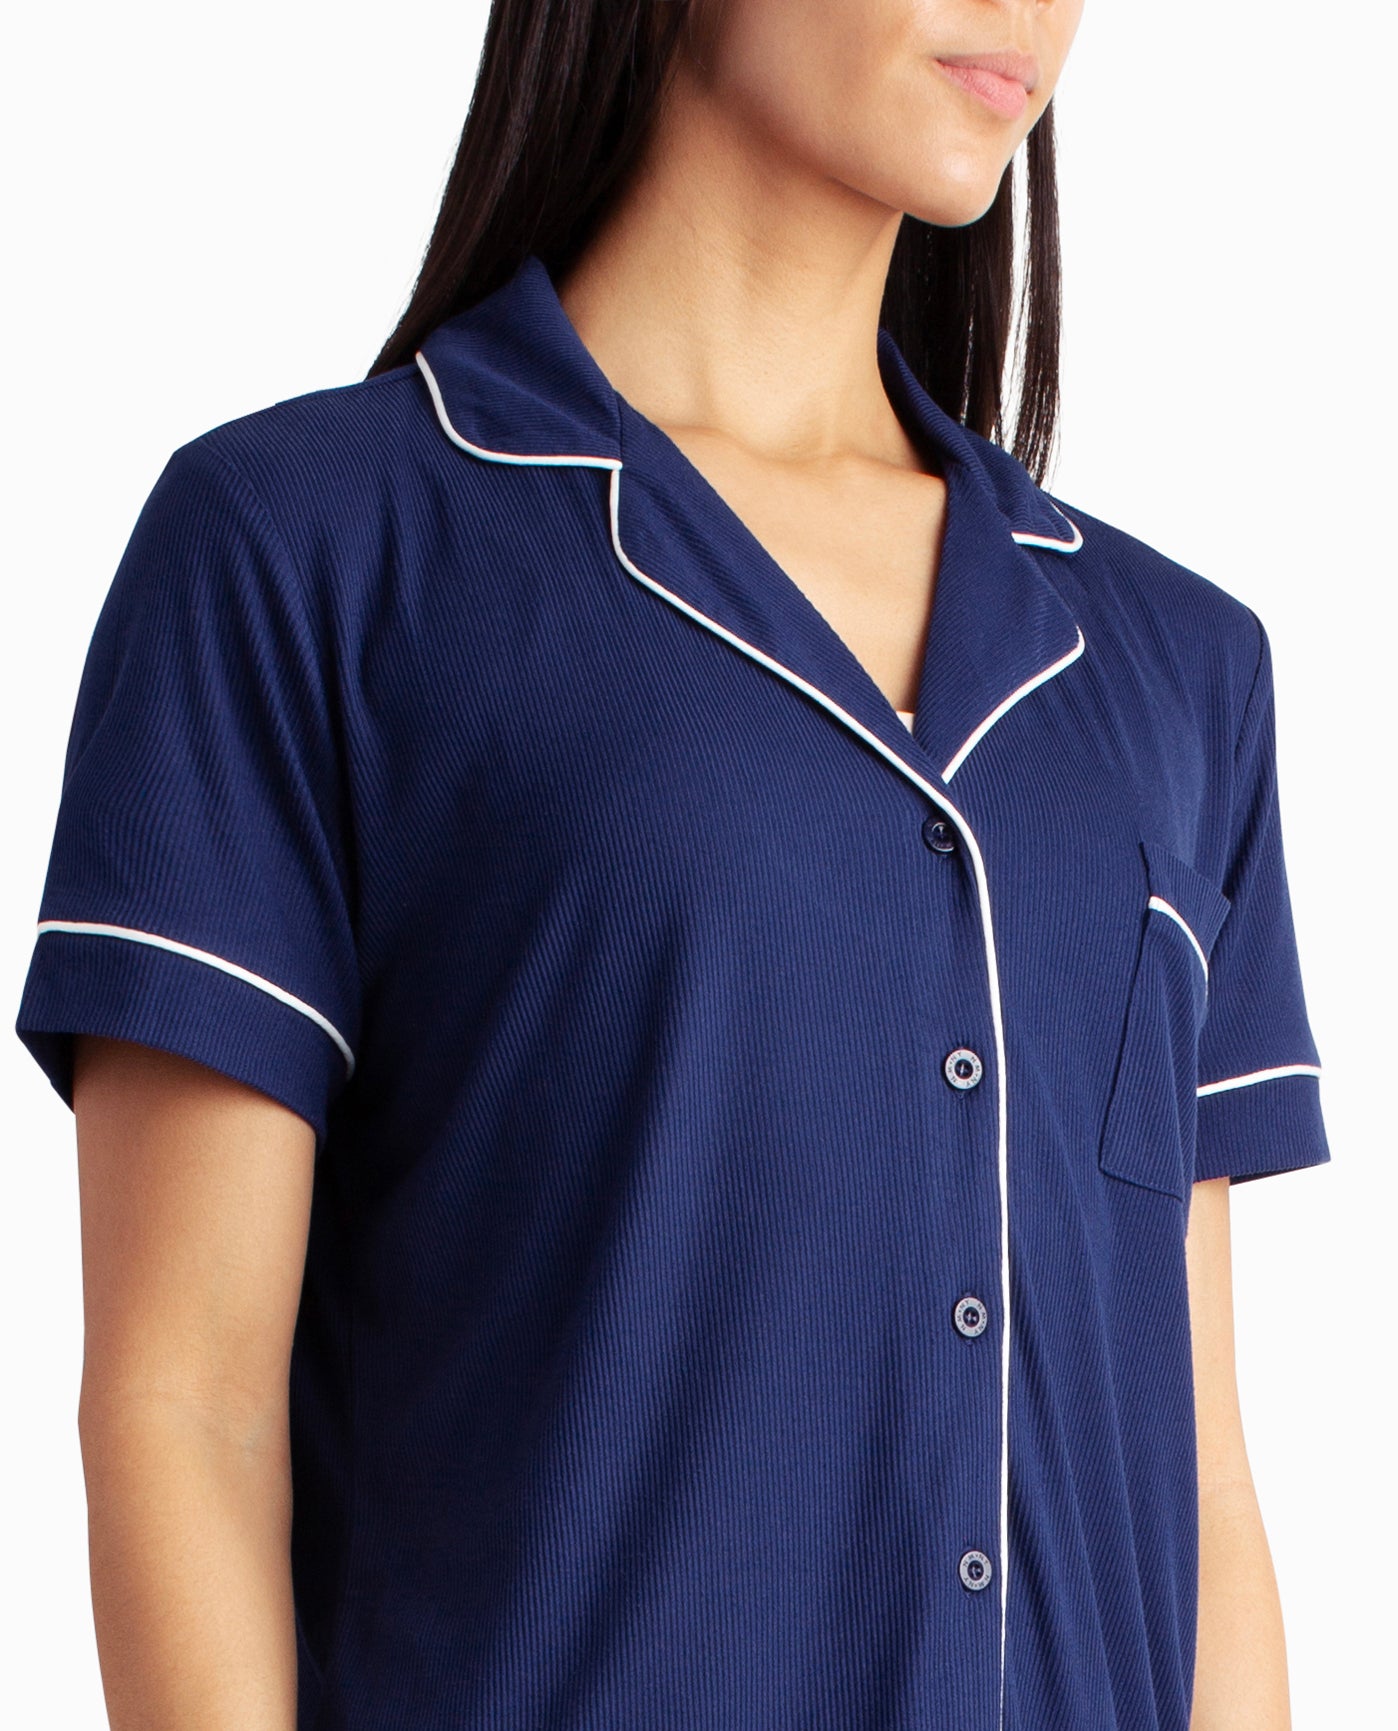 NECKLINE OF RIBBED SHIRT AND PANT TWO-PIECE SLEEPWEAR SET | Indiglo